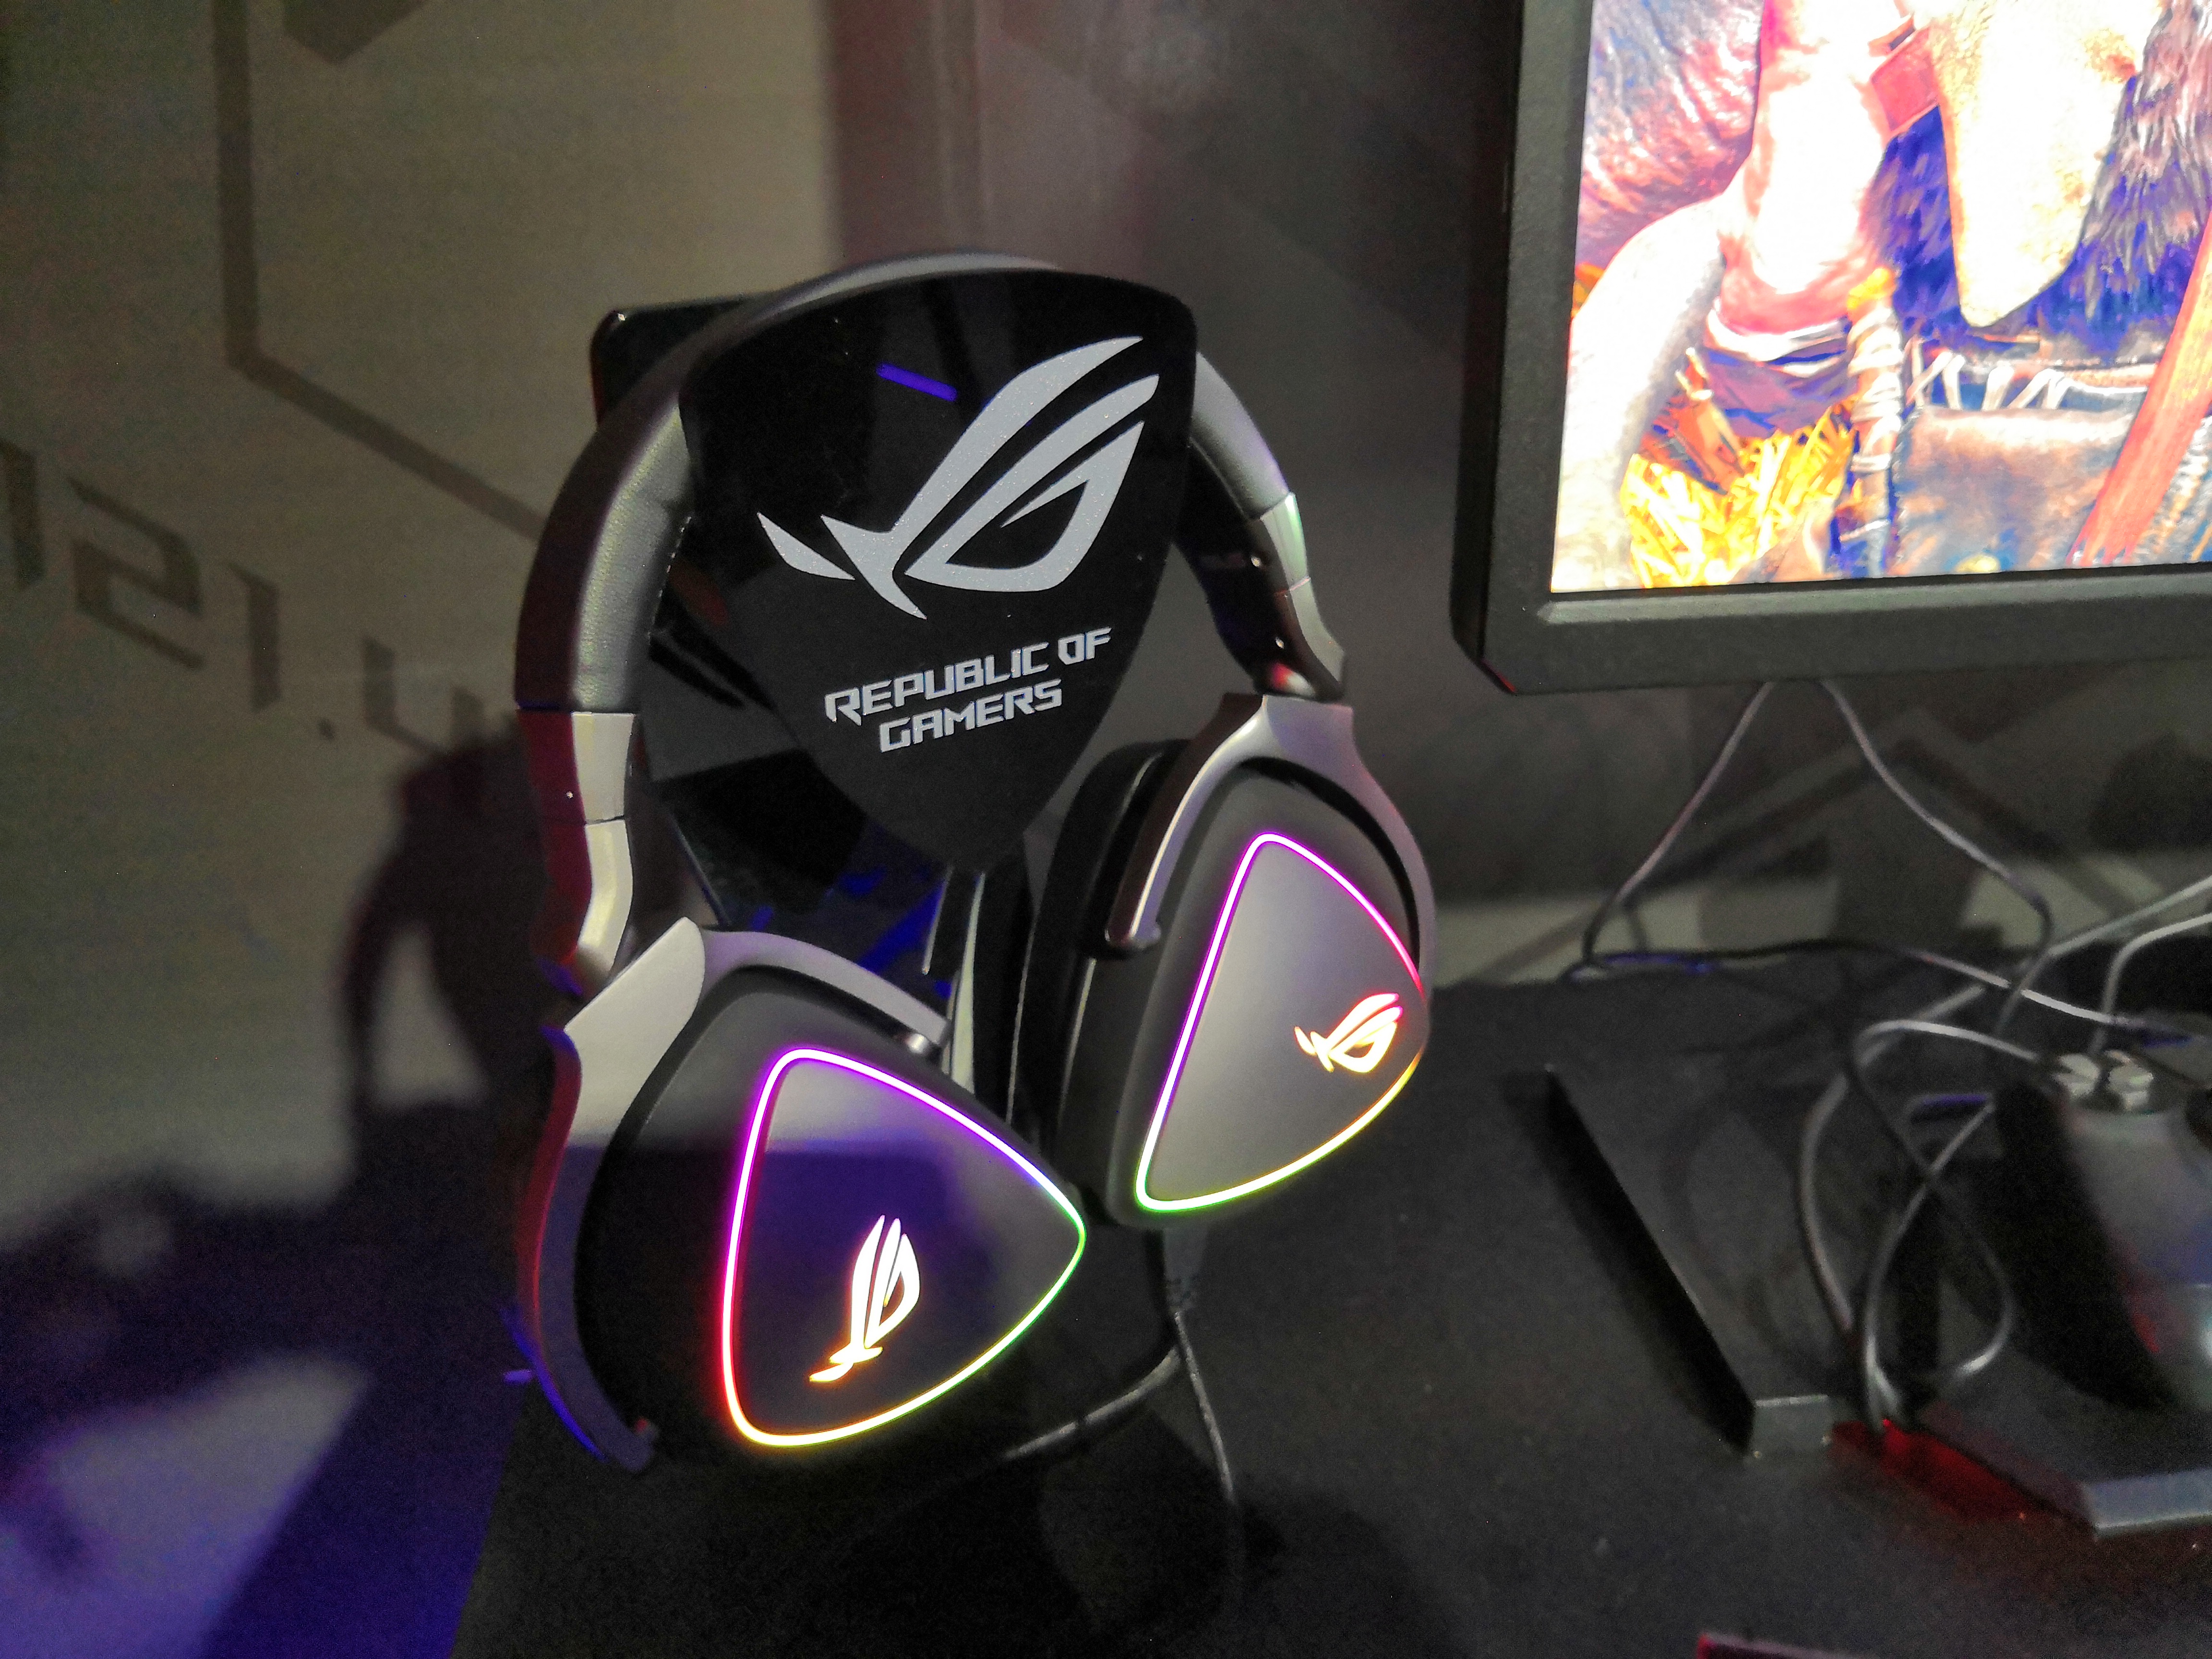 ASUS ROG Delta Gaming Headset with Type-C Connection